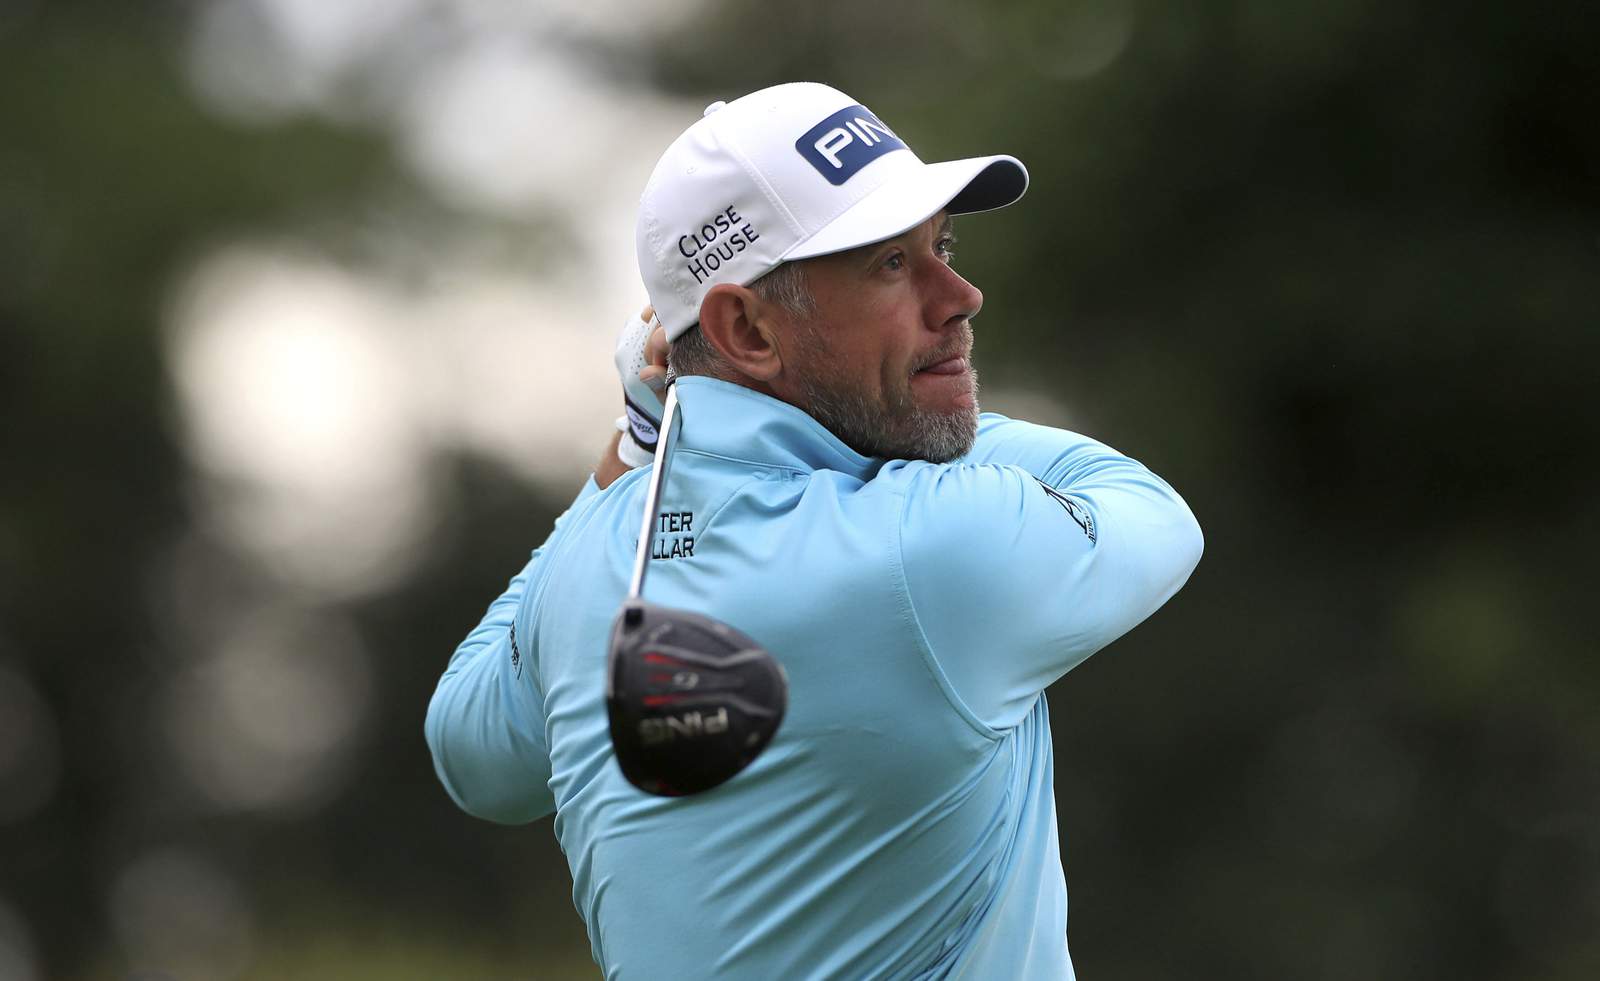 David Law takes first-round lead at British Masters